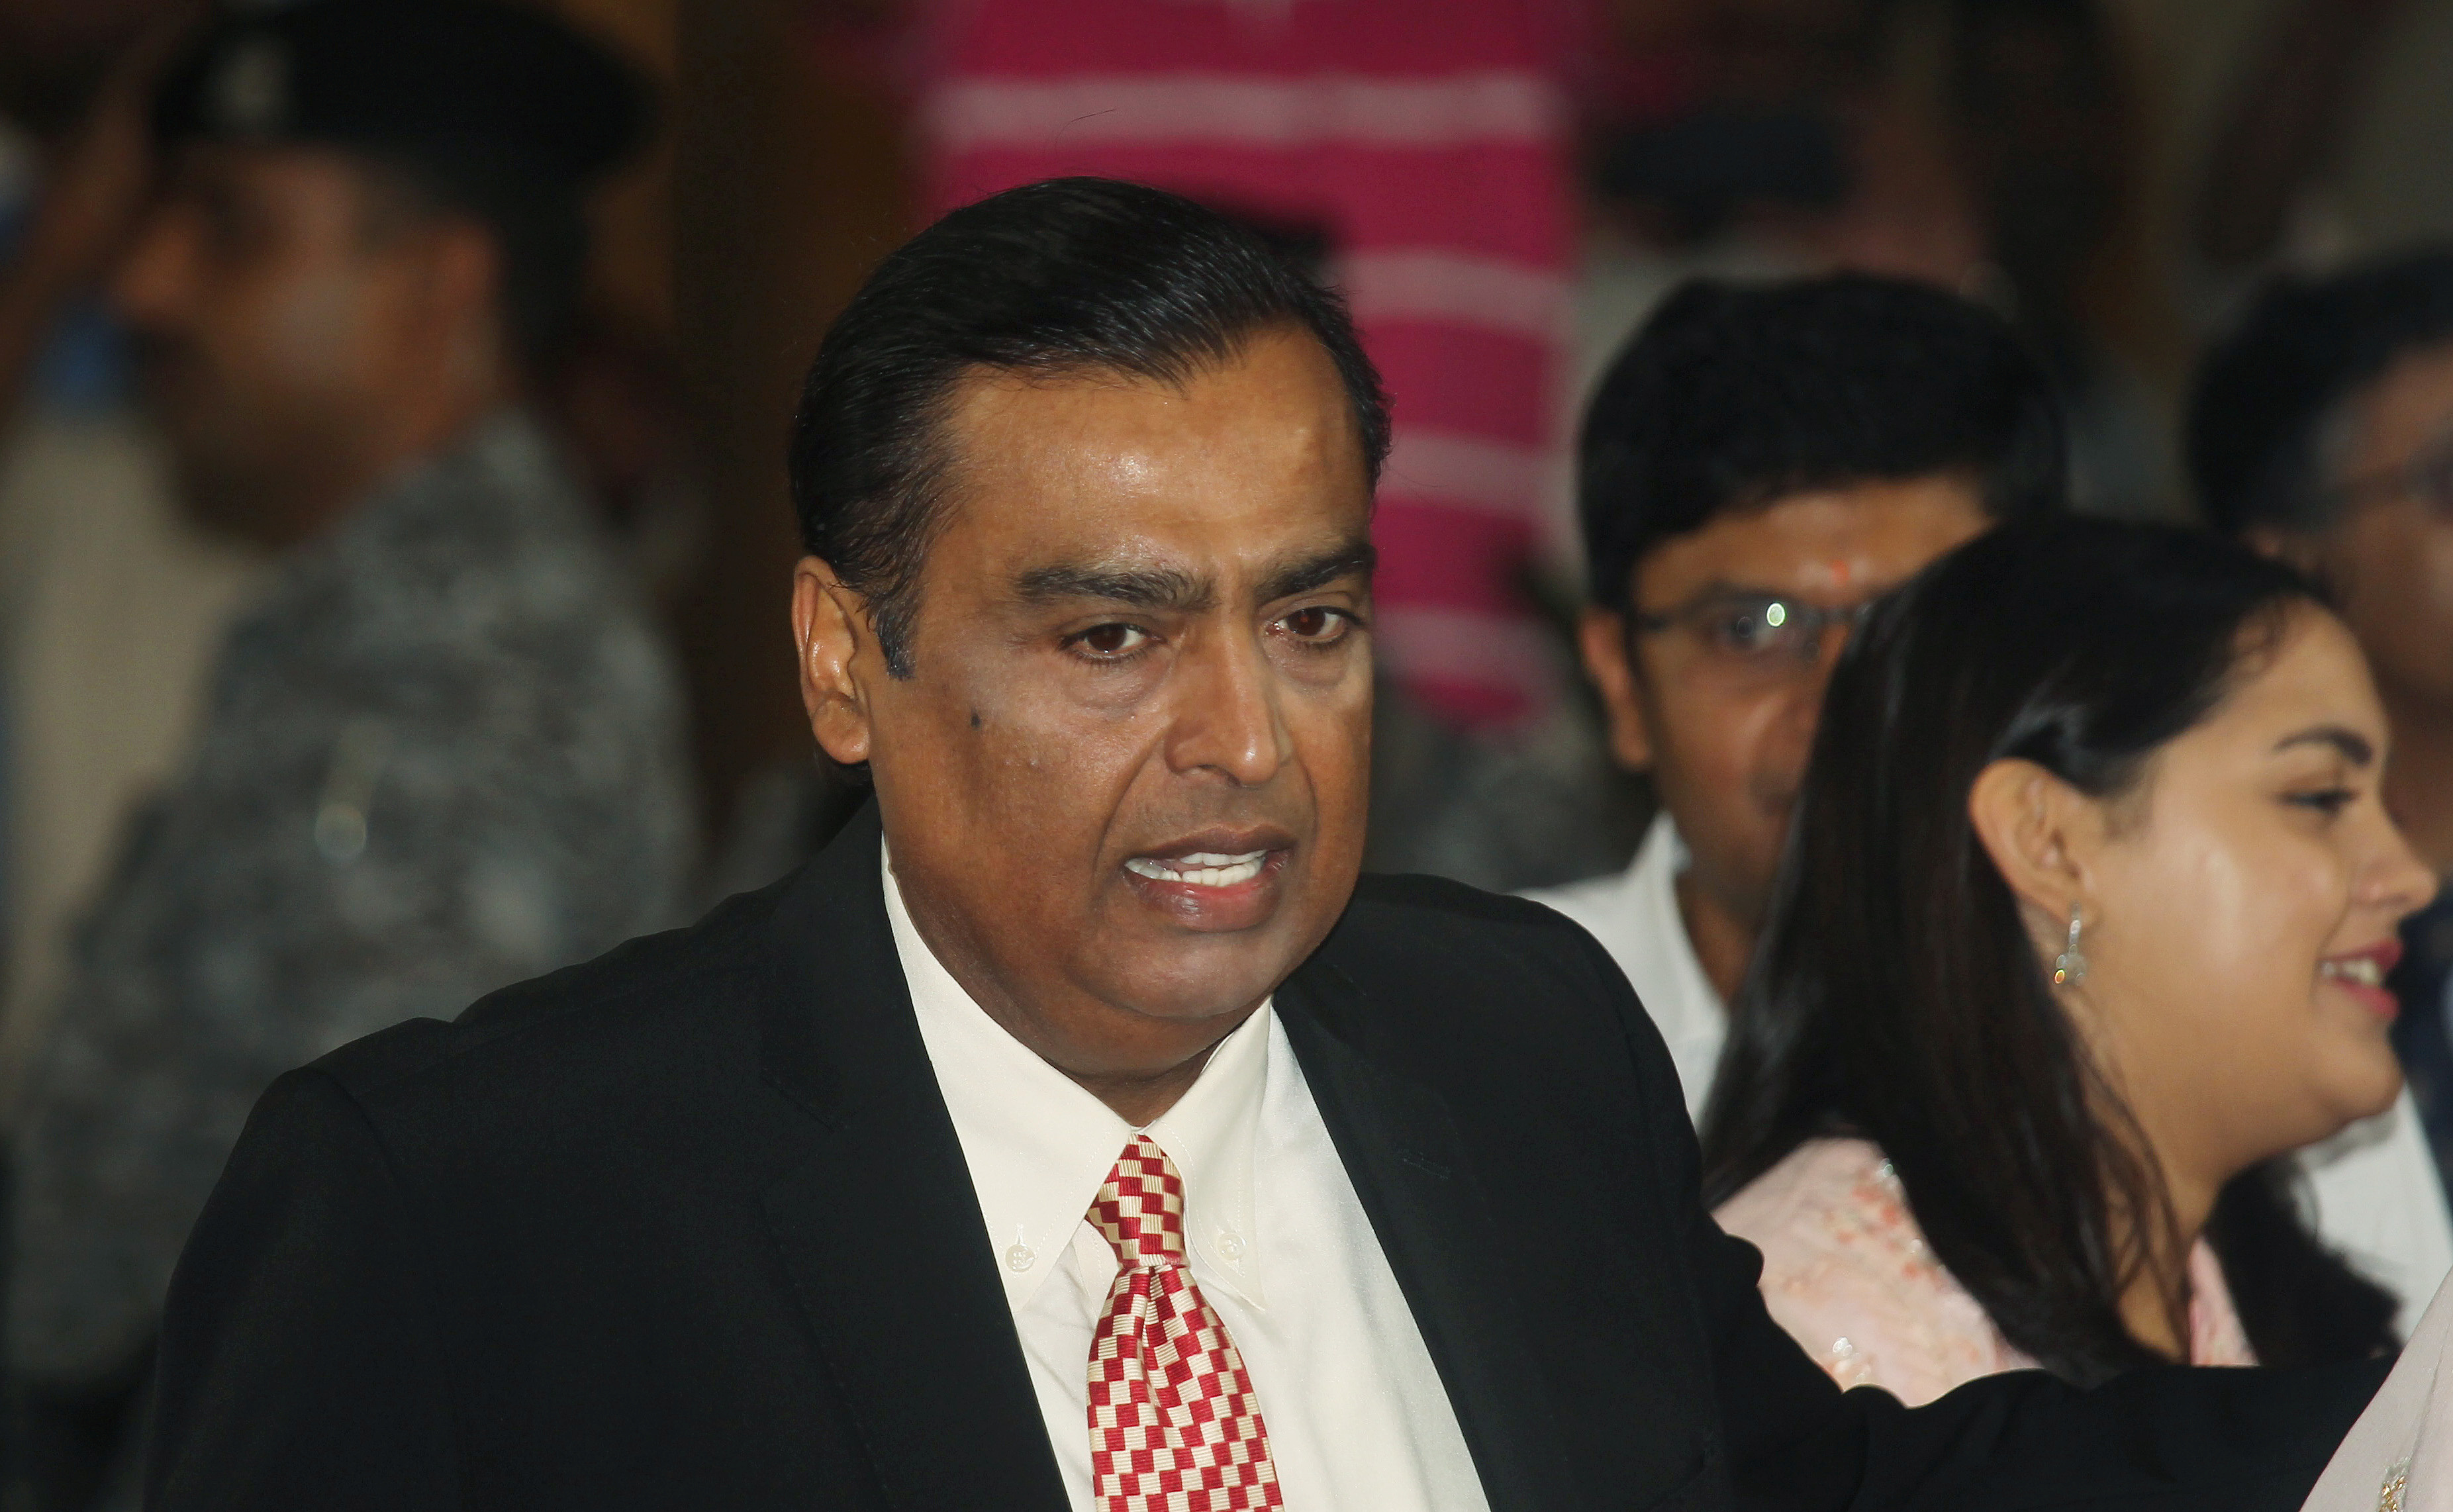 Mukesh Ambani, Chairman and Managing Director of Reliance Industries, attends the company's annual general meeting in Mumbai